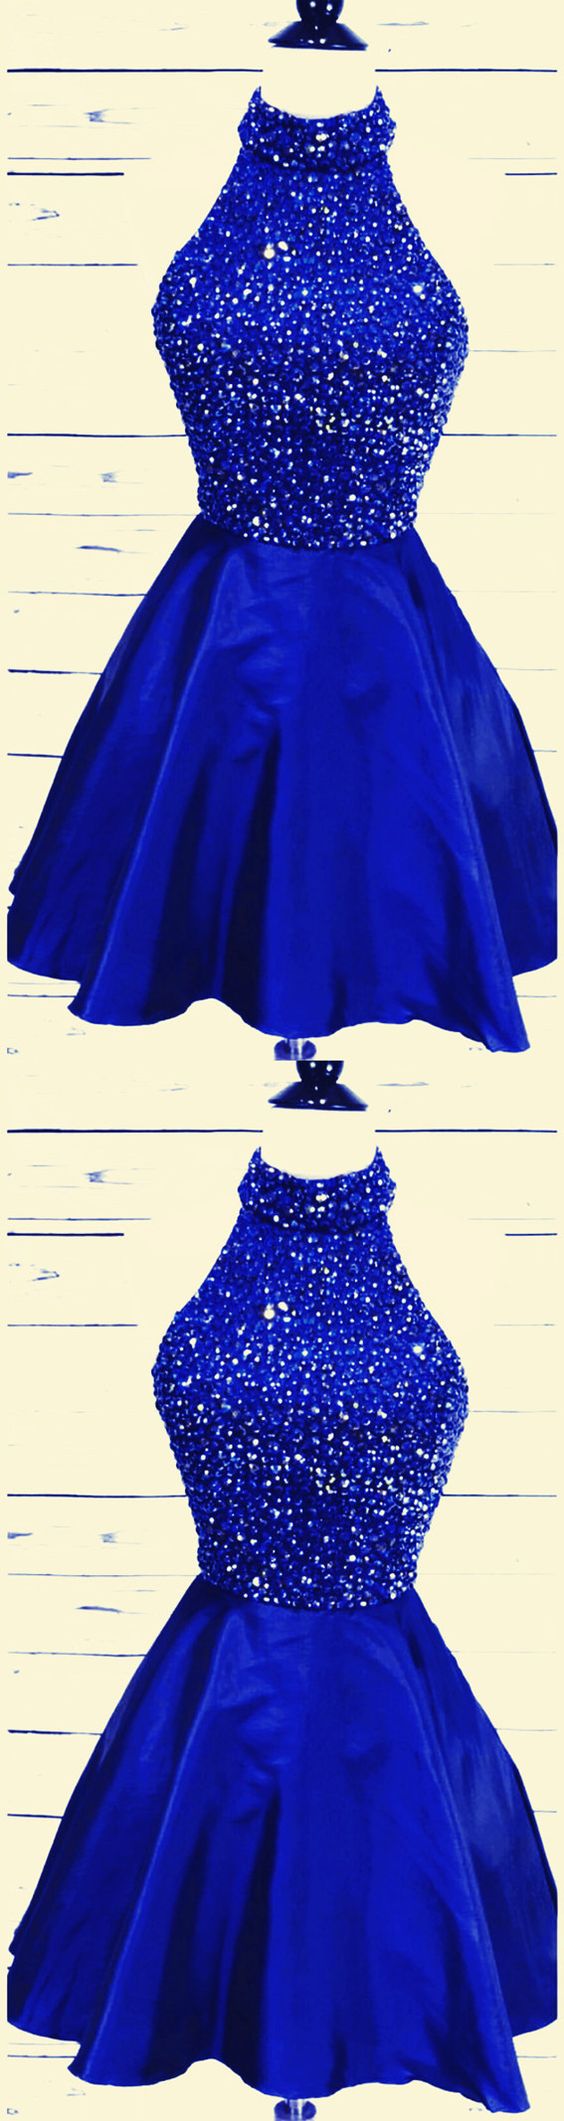 Shiny Beaded Royal Blue Homecoming Dress, Sexy Halter Short Prom Dress, Fashion Women Cocktail Party Gowns